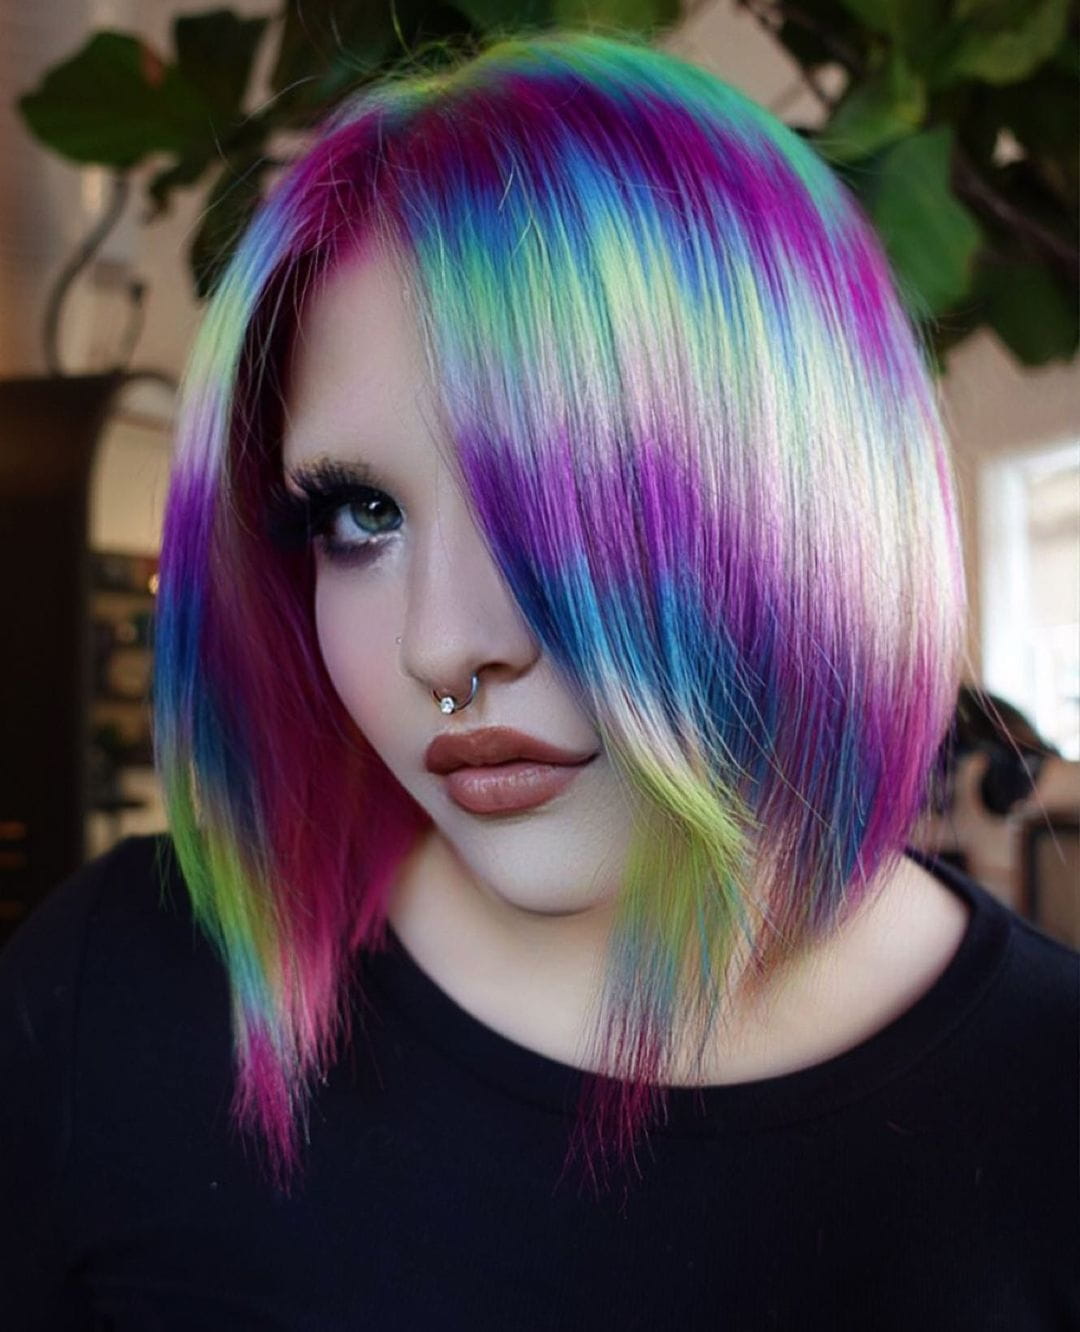 100+ Best Colorful Hair Ideas images 88